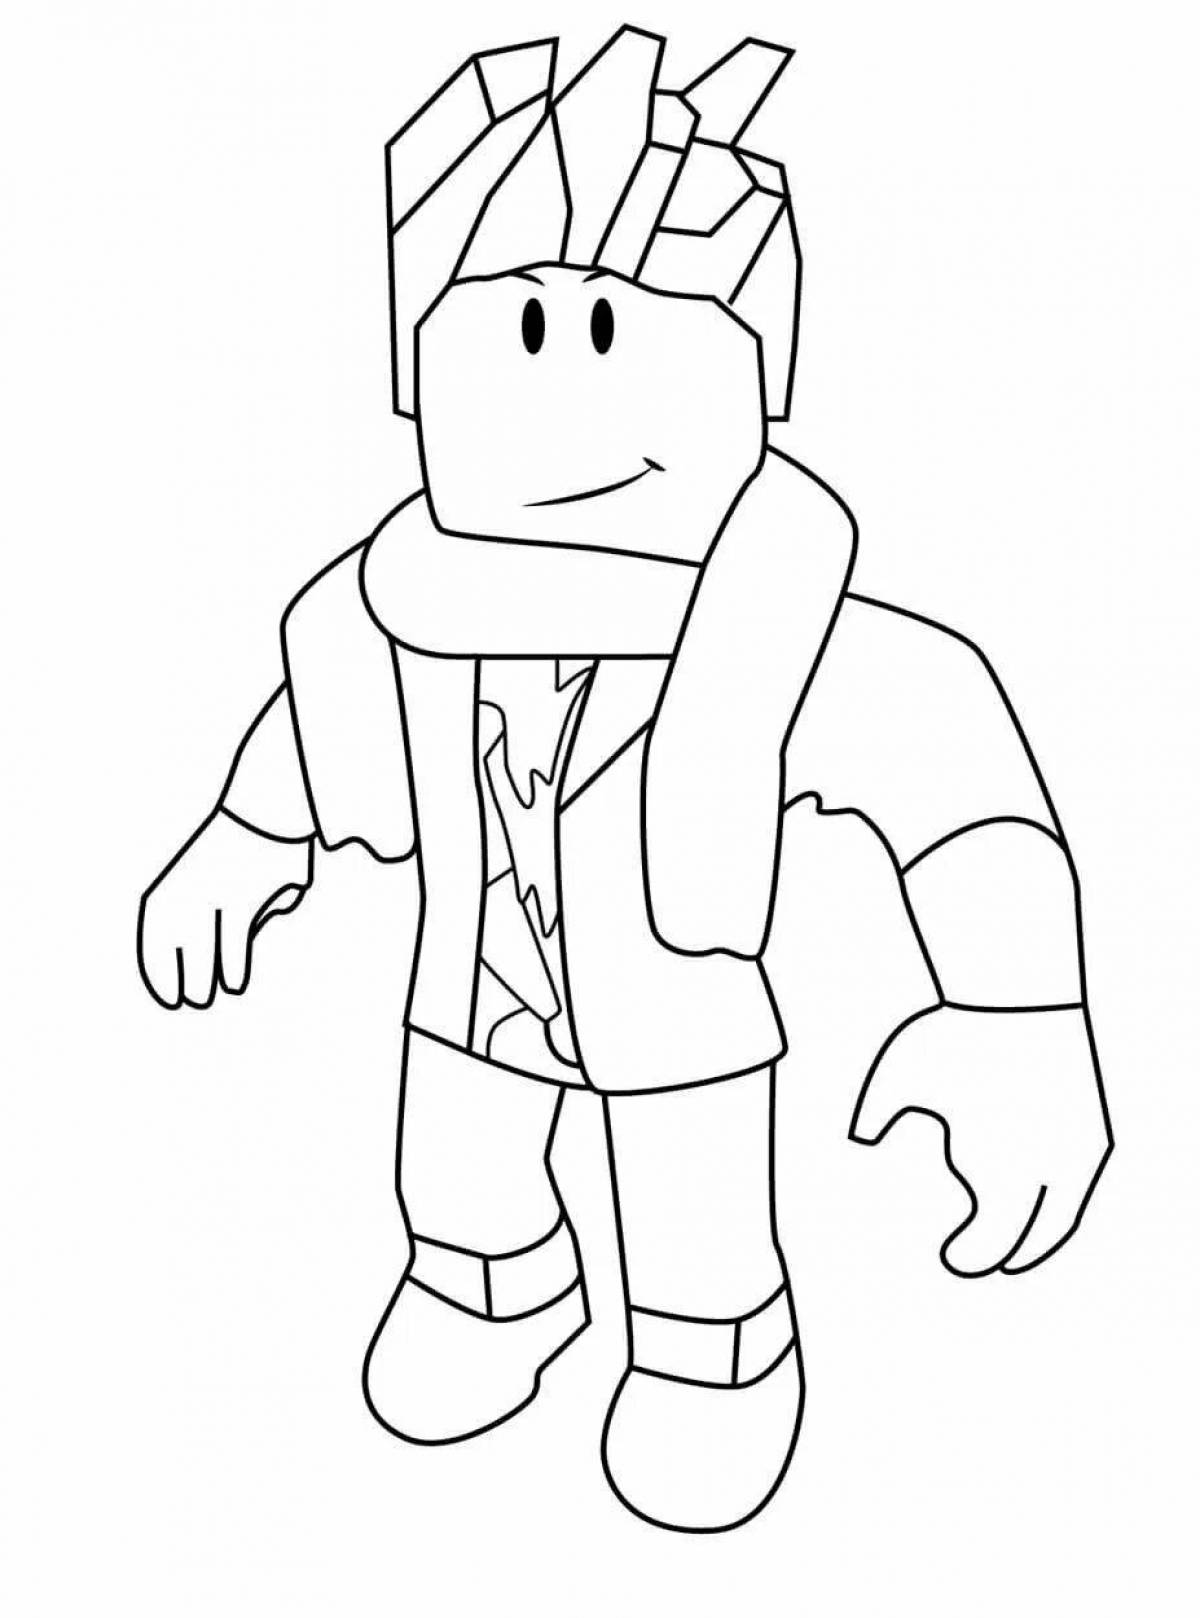 Rainbow friends roblox coloring page for boys